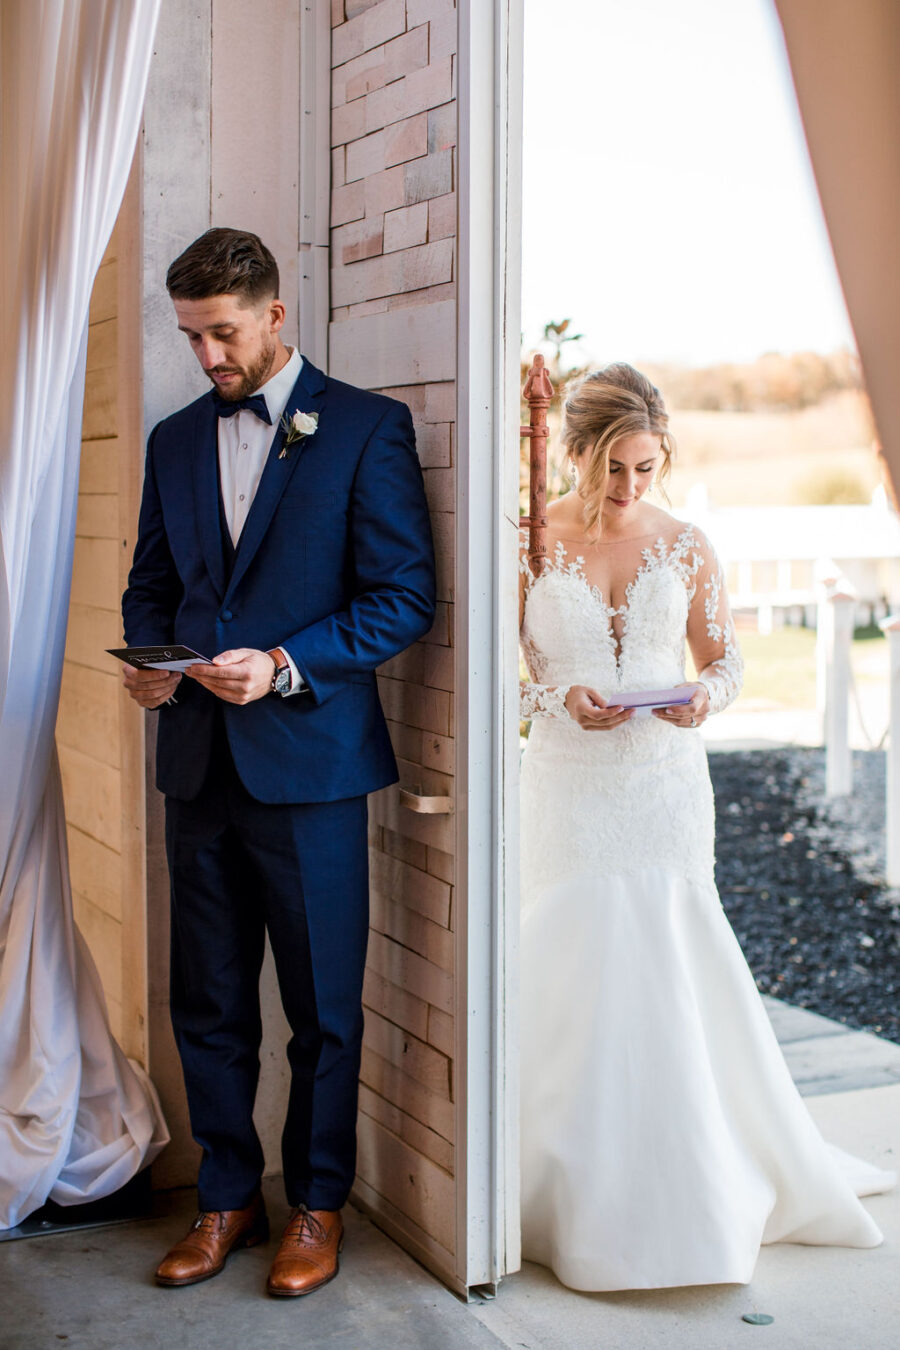 Wedding first look: Intimate Barn Wedding from John Myers Photography